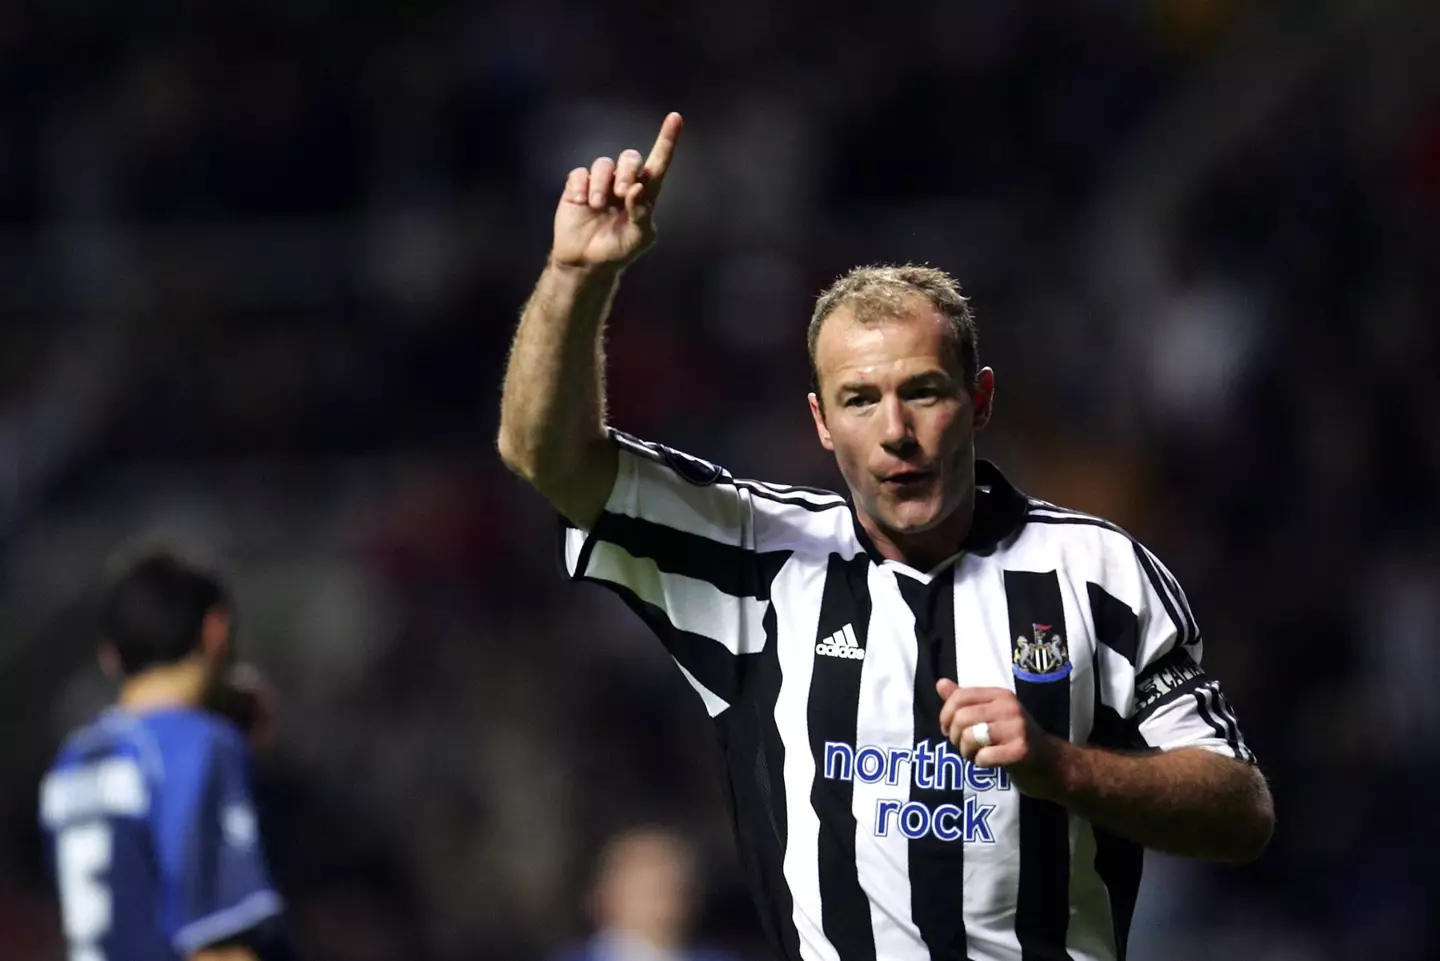 Alan Shearer is the Premier League's all-time record goalscorer (Image: Alamy)